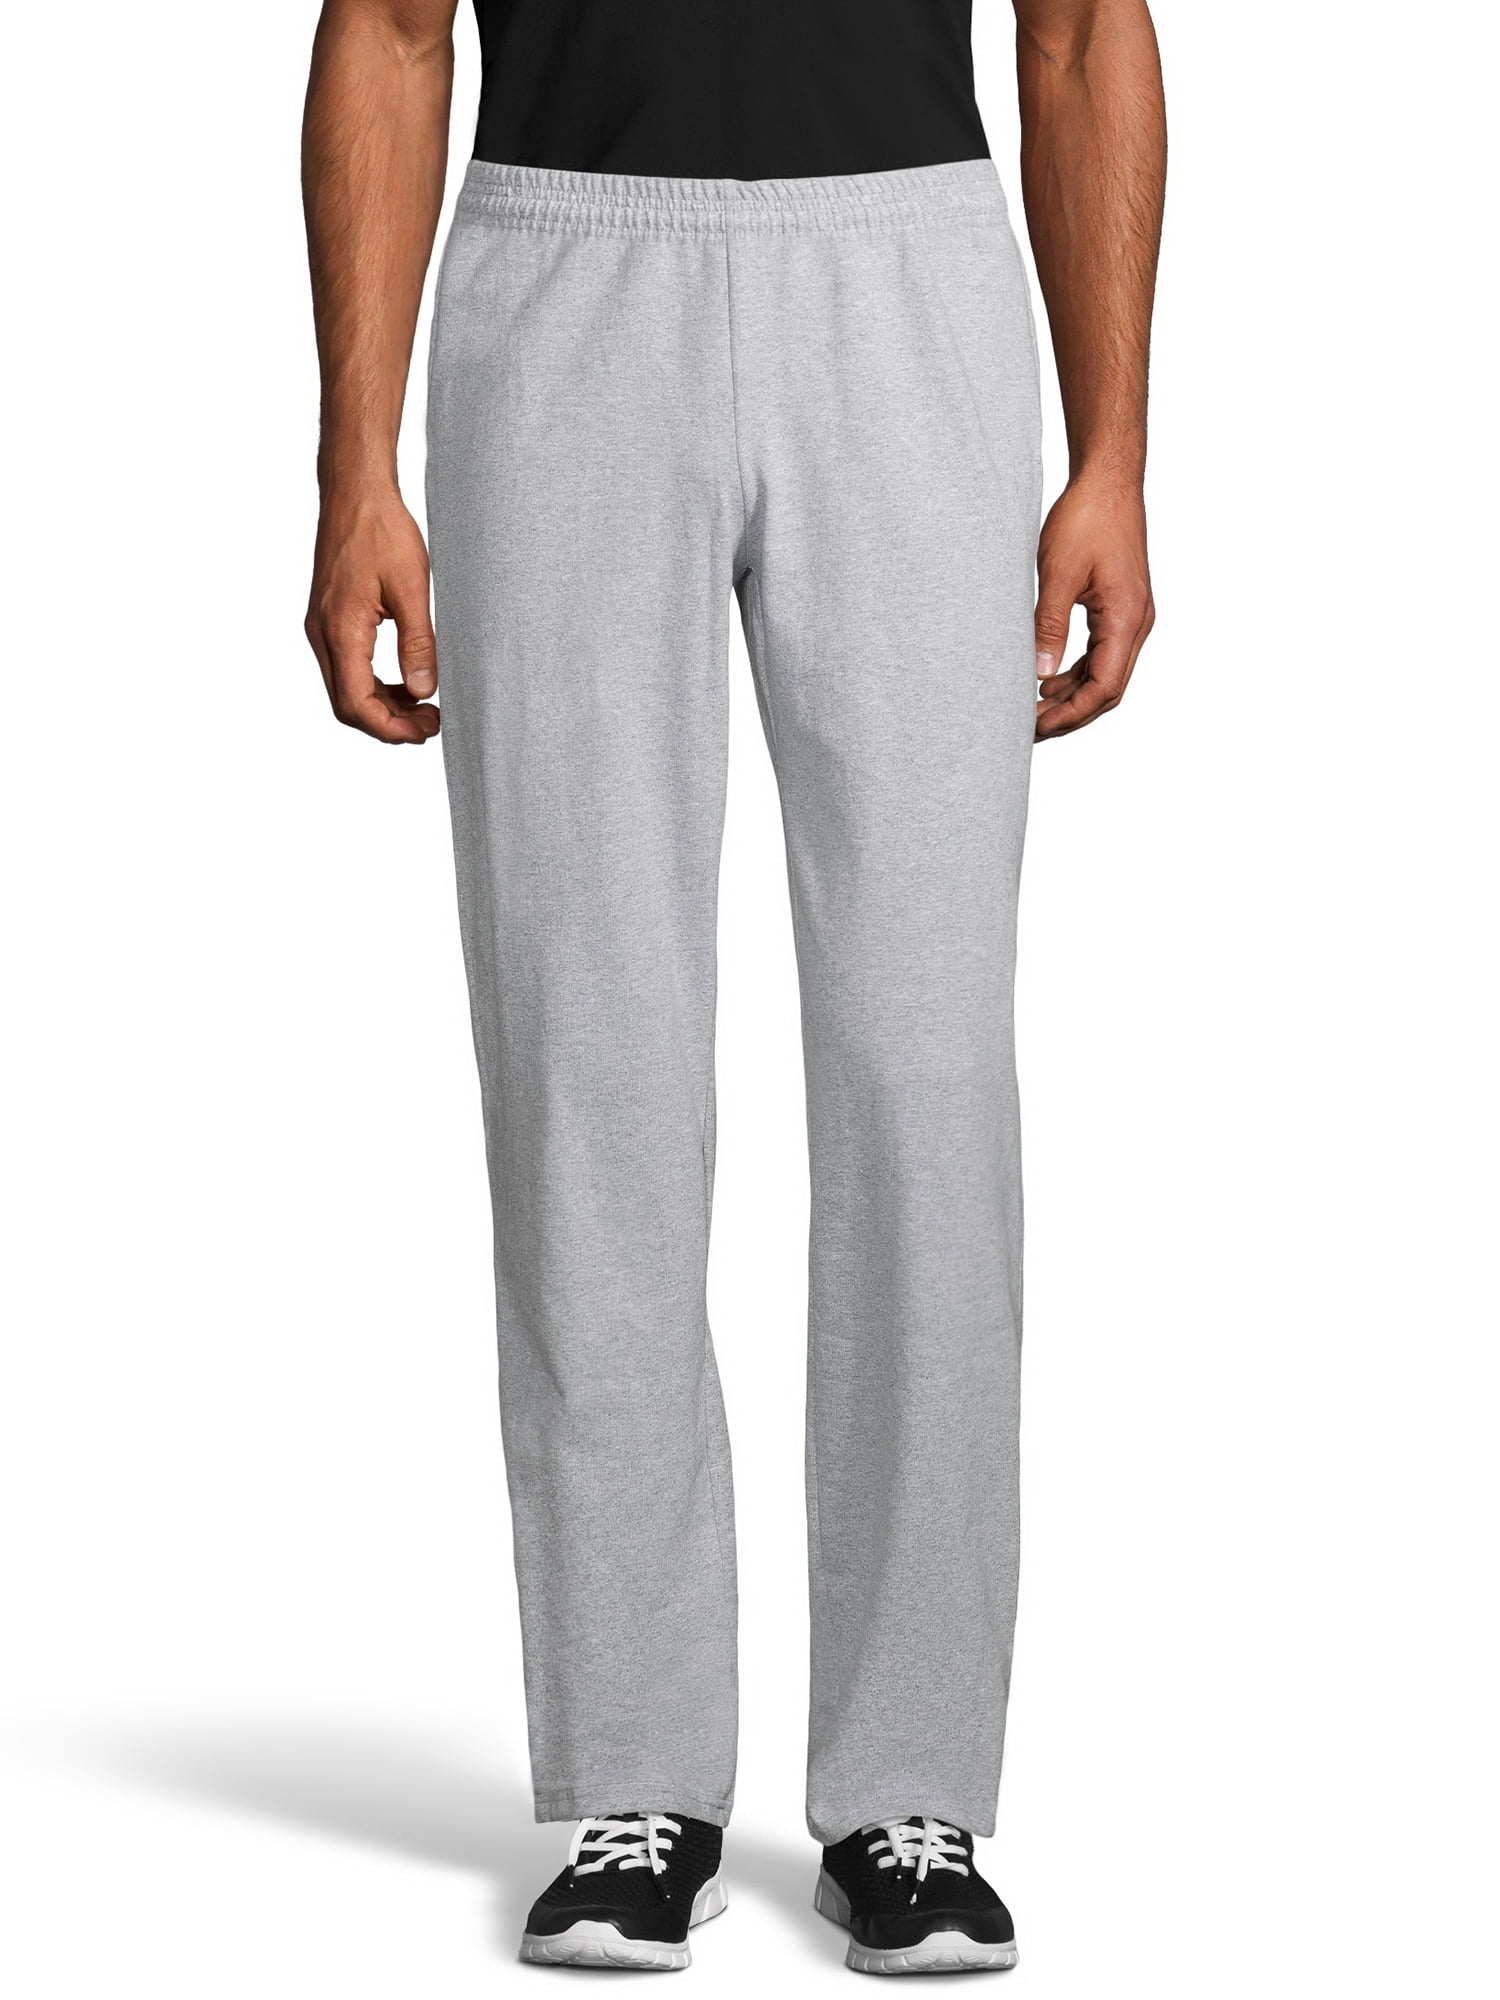 Amazon.com: Fila Big and Tall Jersey Pants for Men – Open Bottom  Lightweight Lounge Pant Heather Grey : Clothing, Shoes & Jewelry